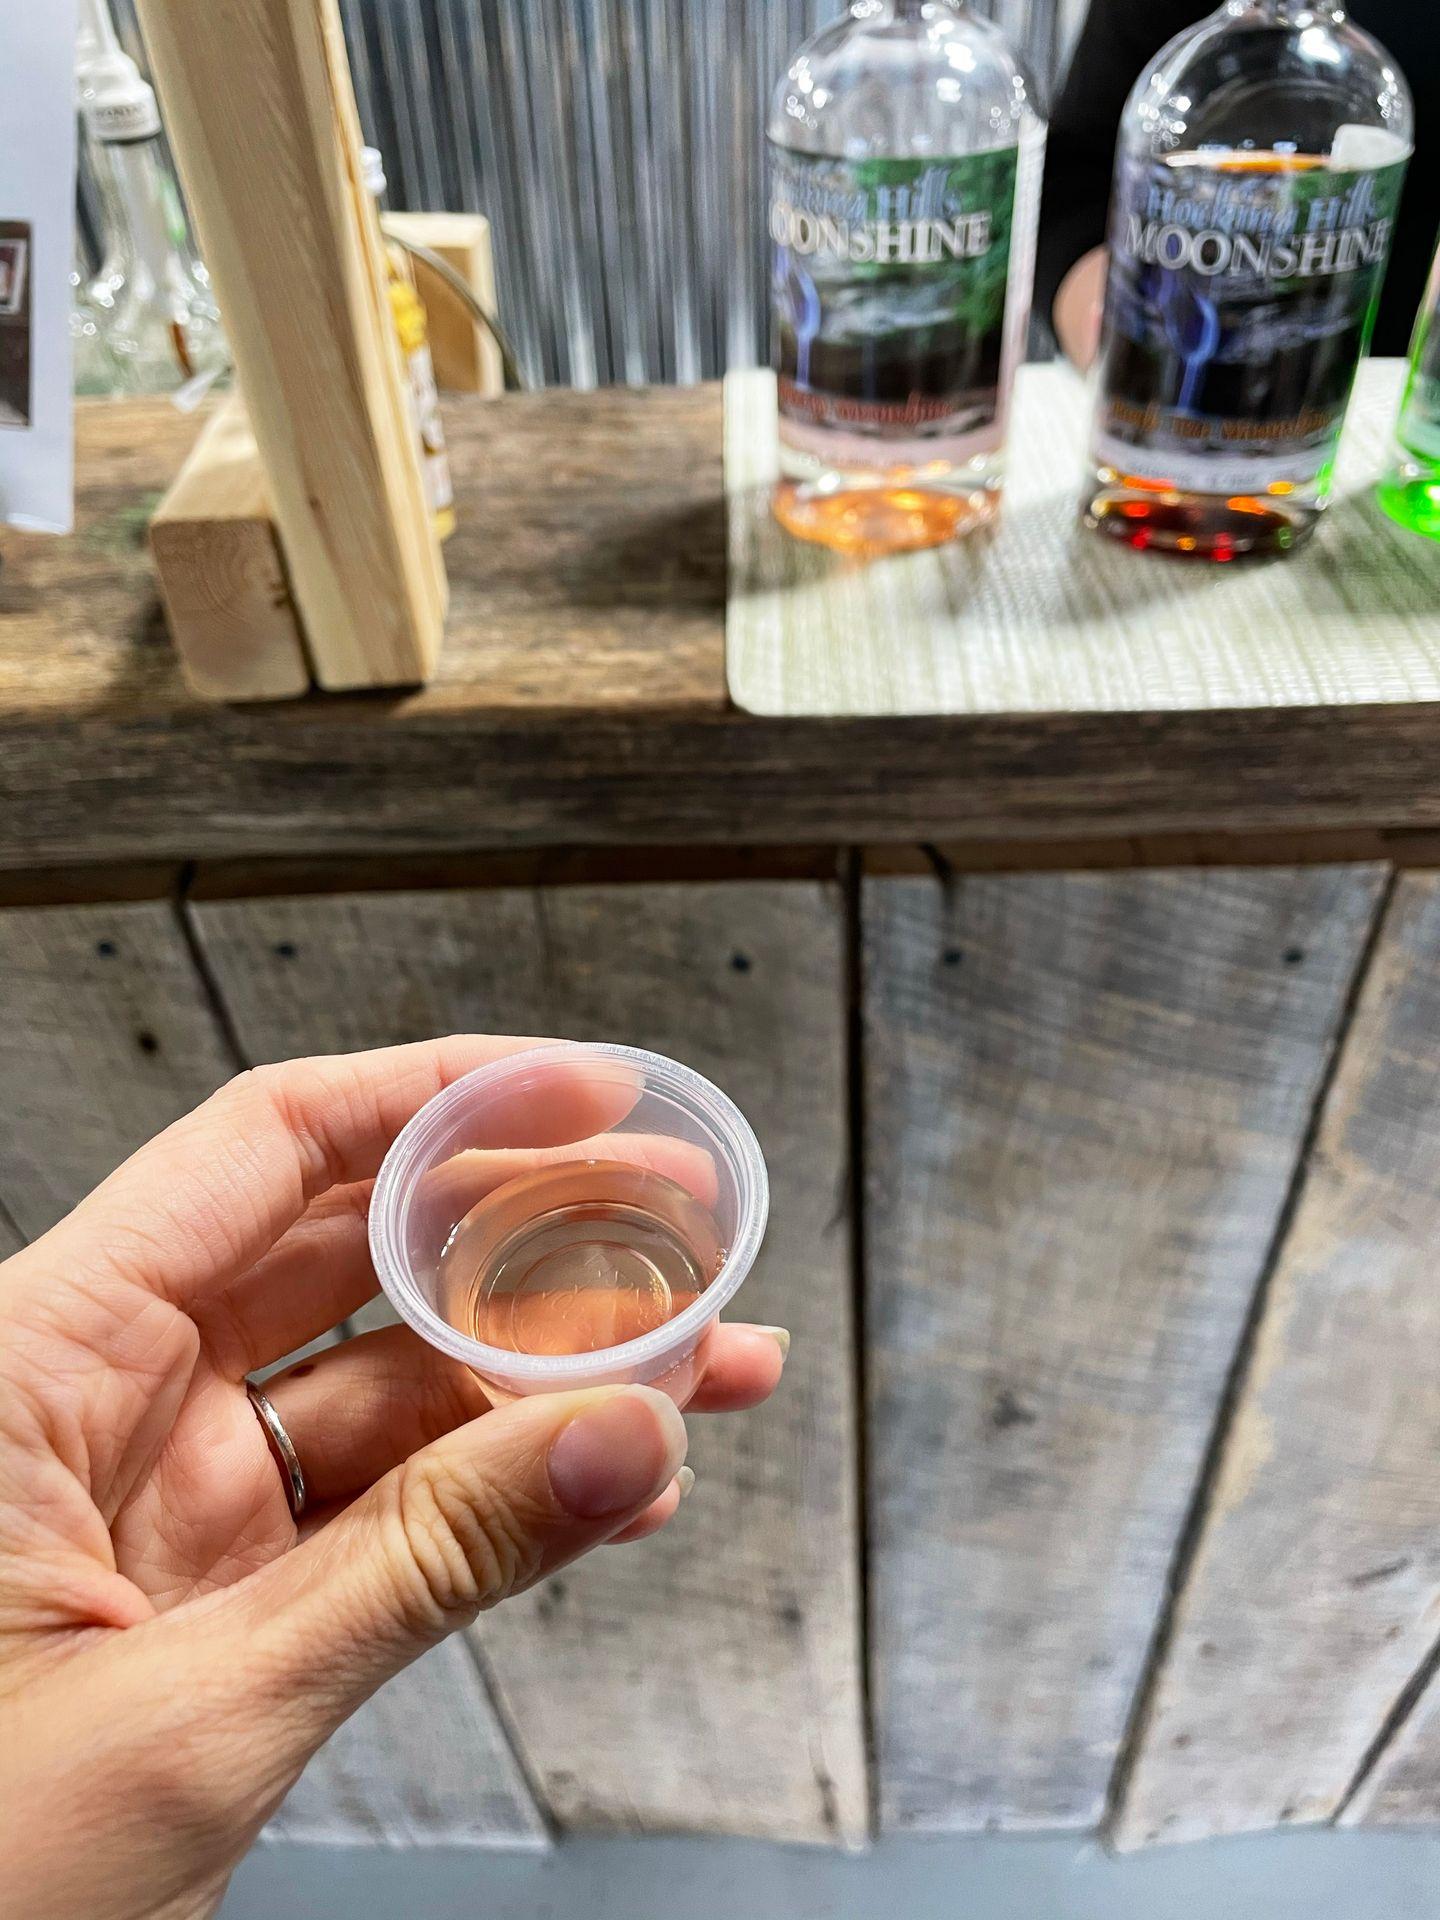 A small sample cup of moonshine.